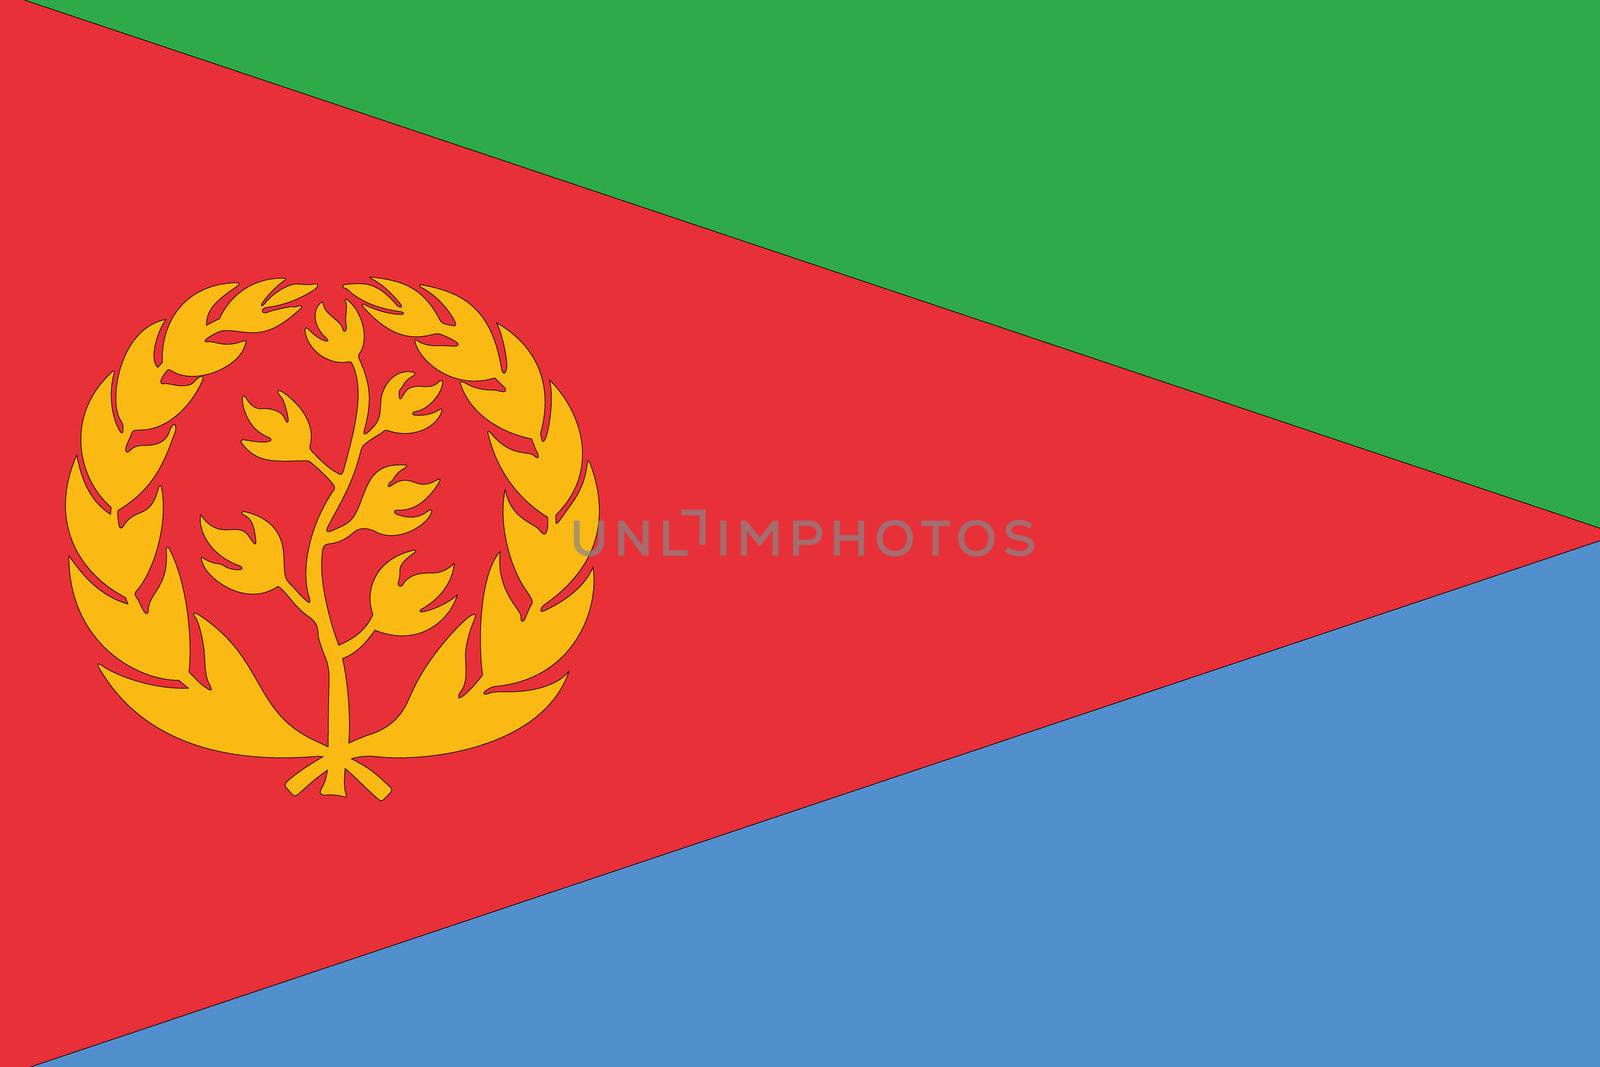 An Illustrated Drawing of the flag of Eritrea